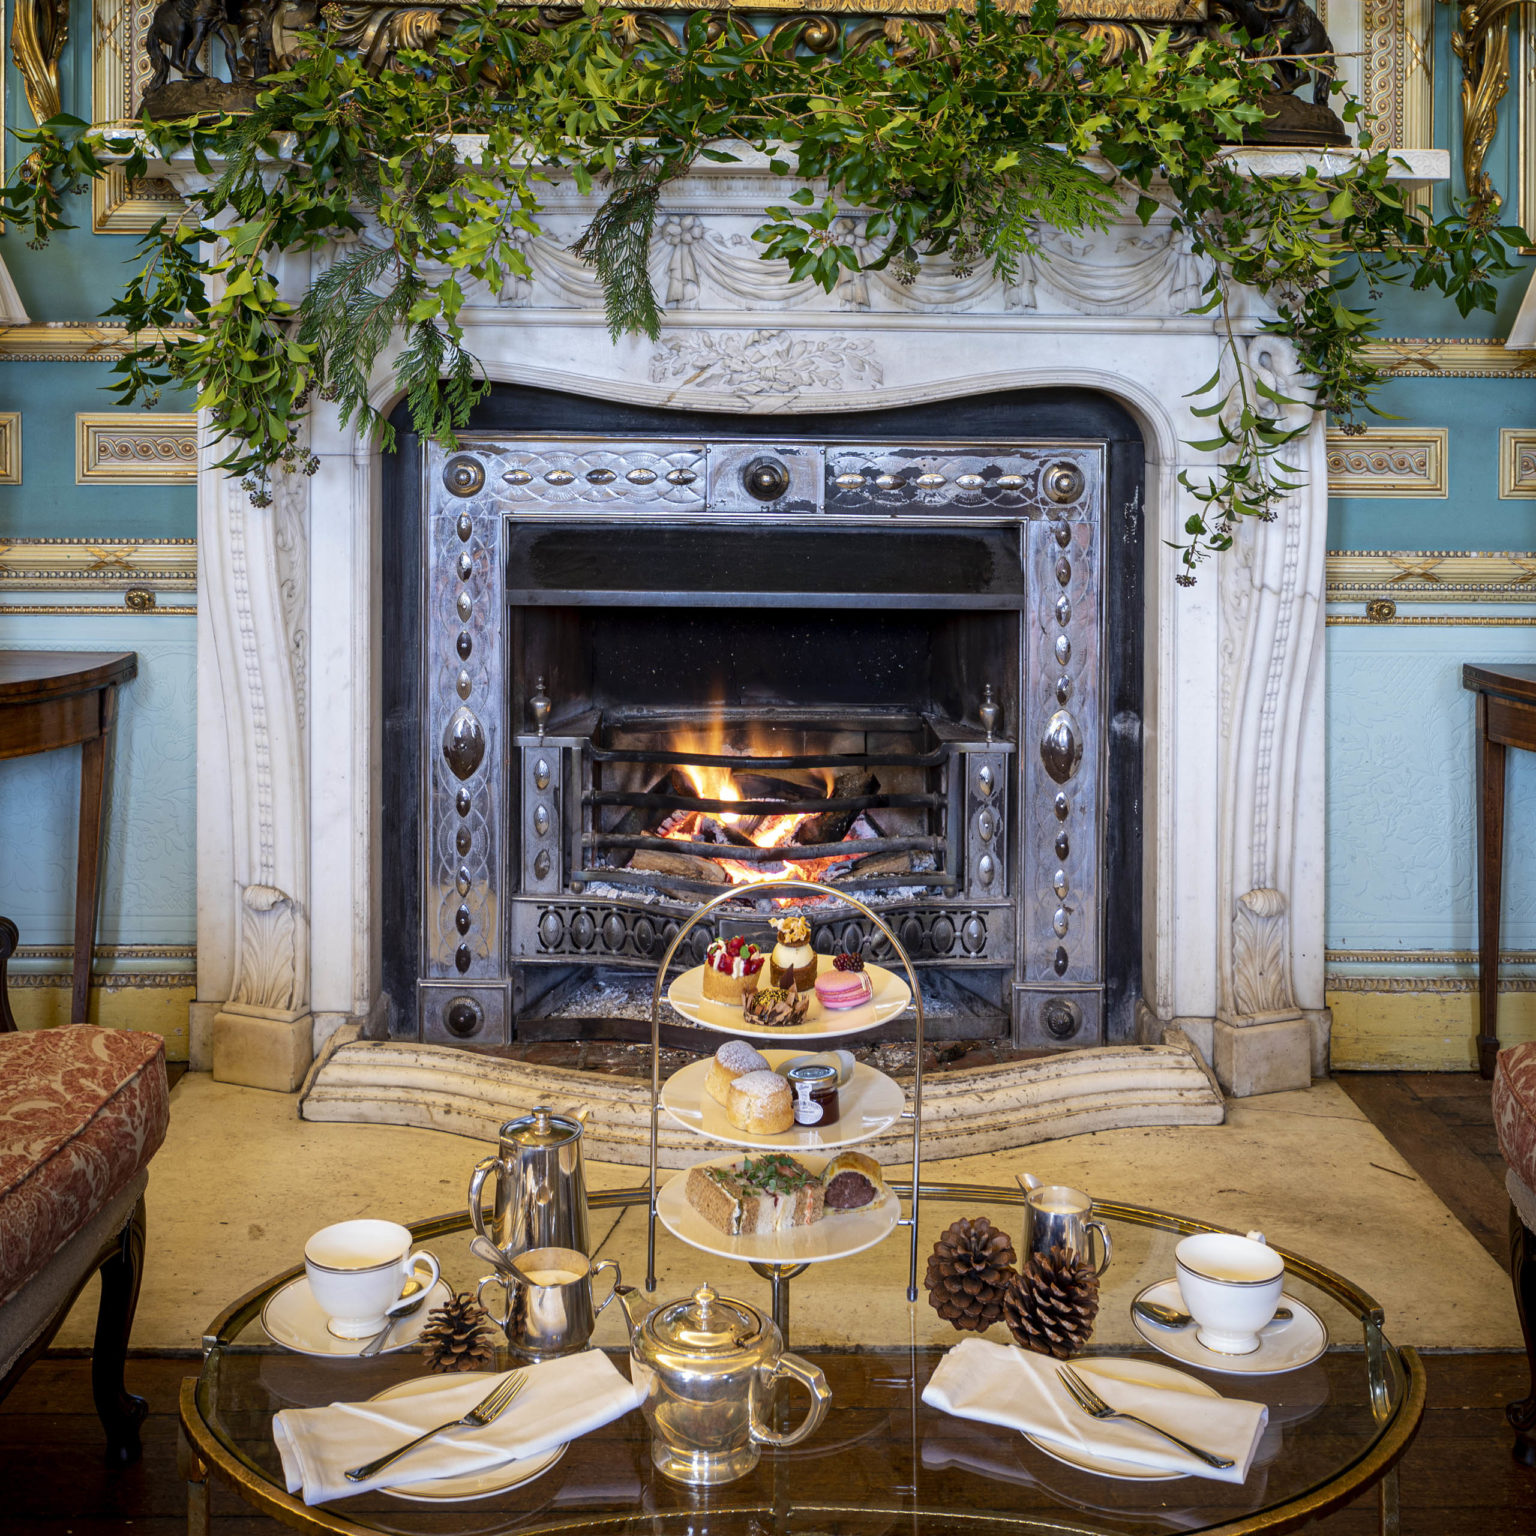 Afternoon tea on a coffee table in front of a fireplace at Swinton Park Hotel in North Yorkshire